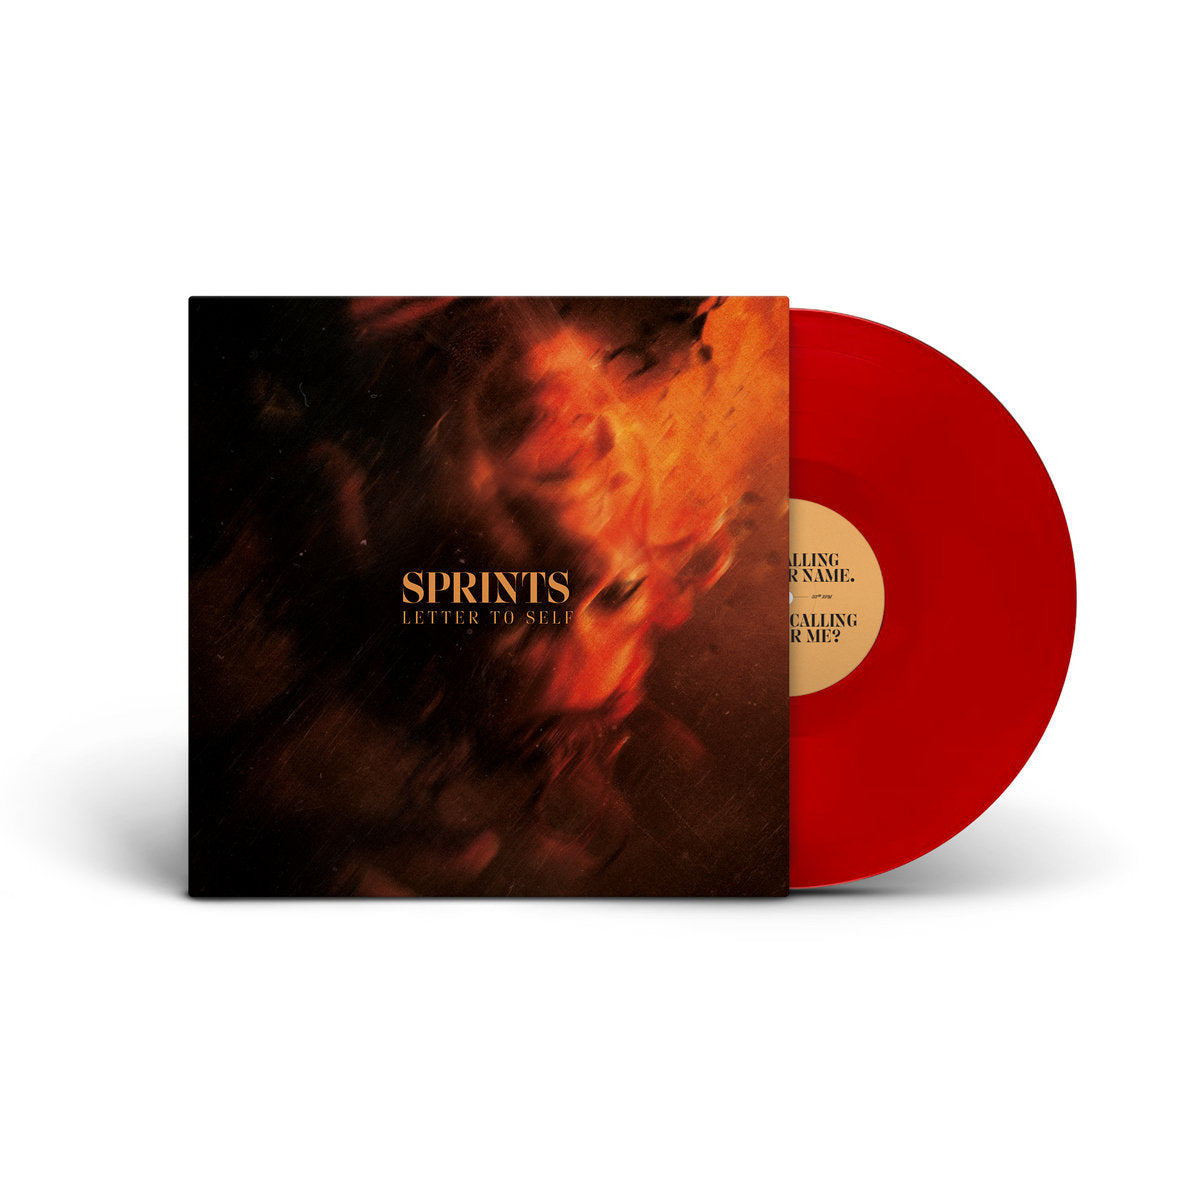 Sprints - Letter to Self (Limited Edition on Red Vinyl)